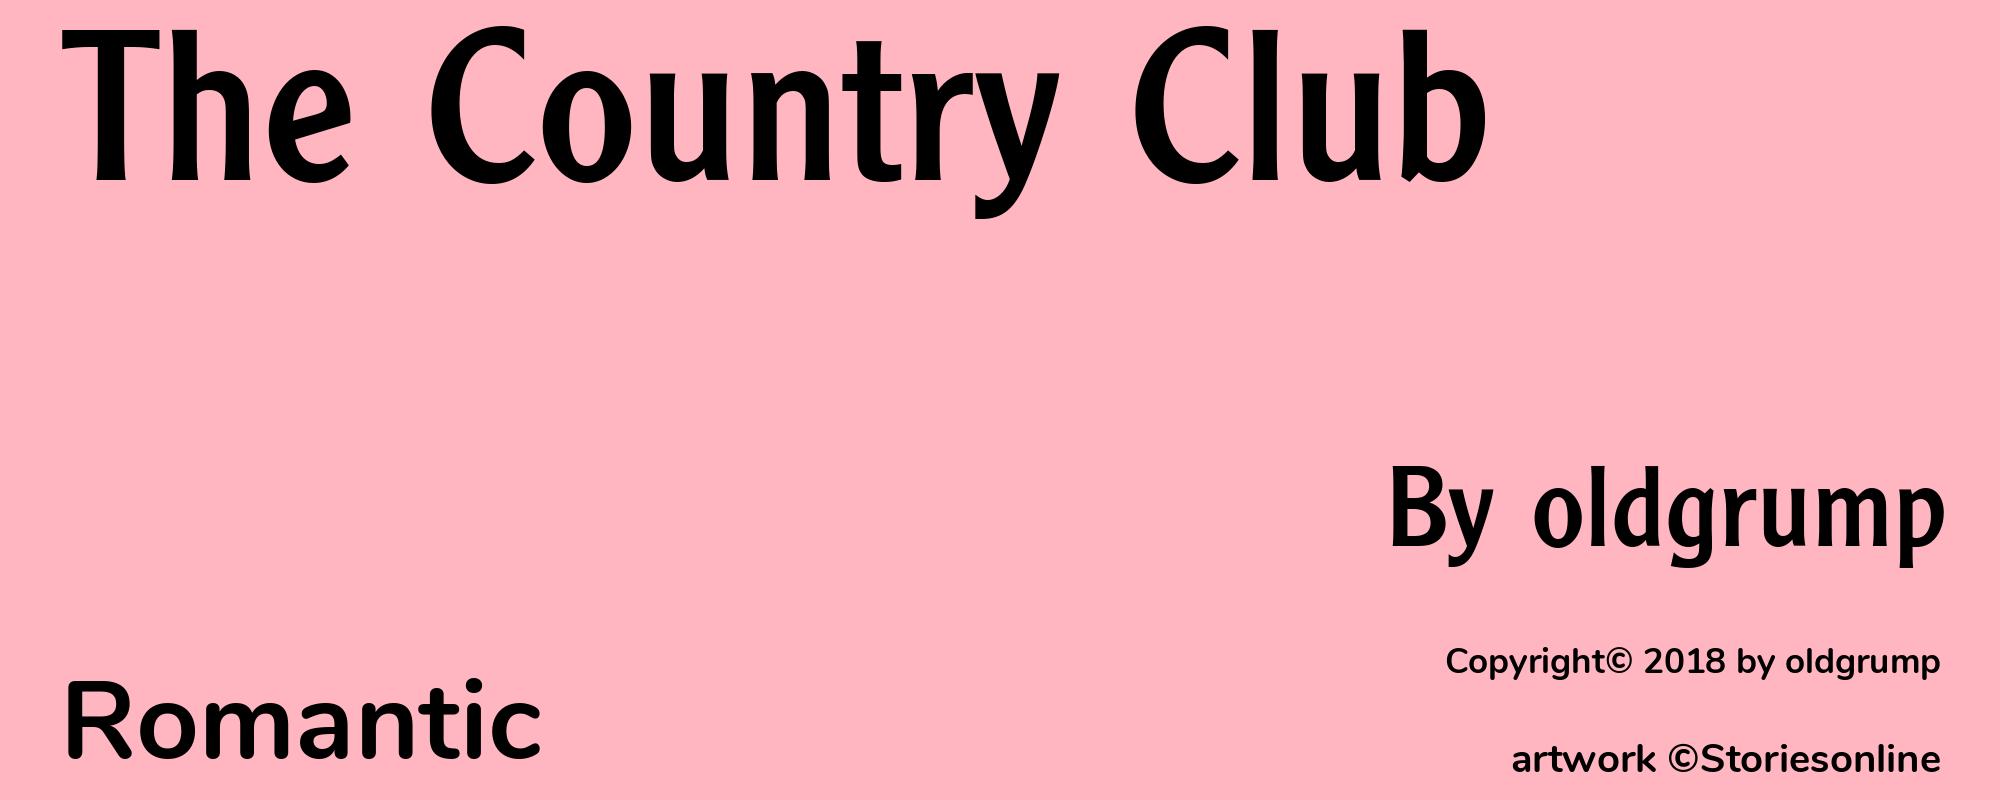 The Country Club - Cover